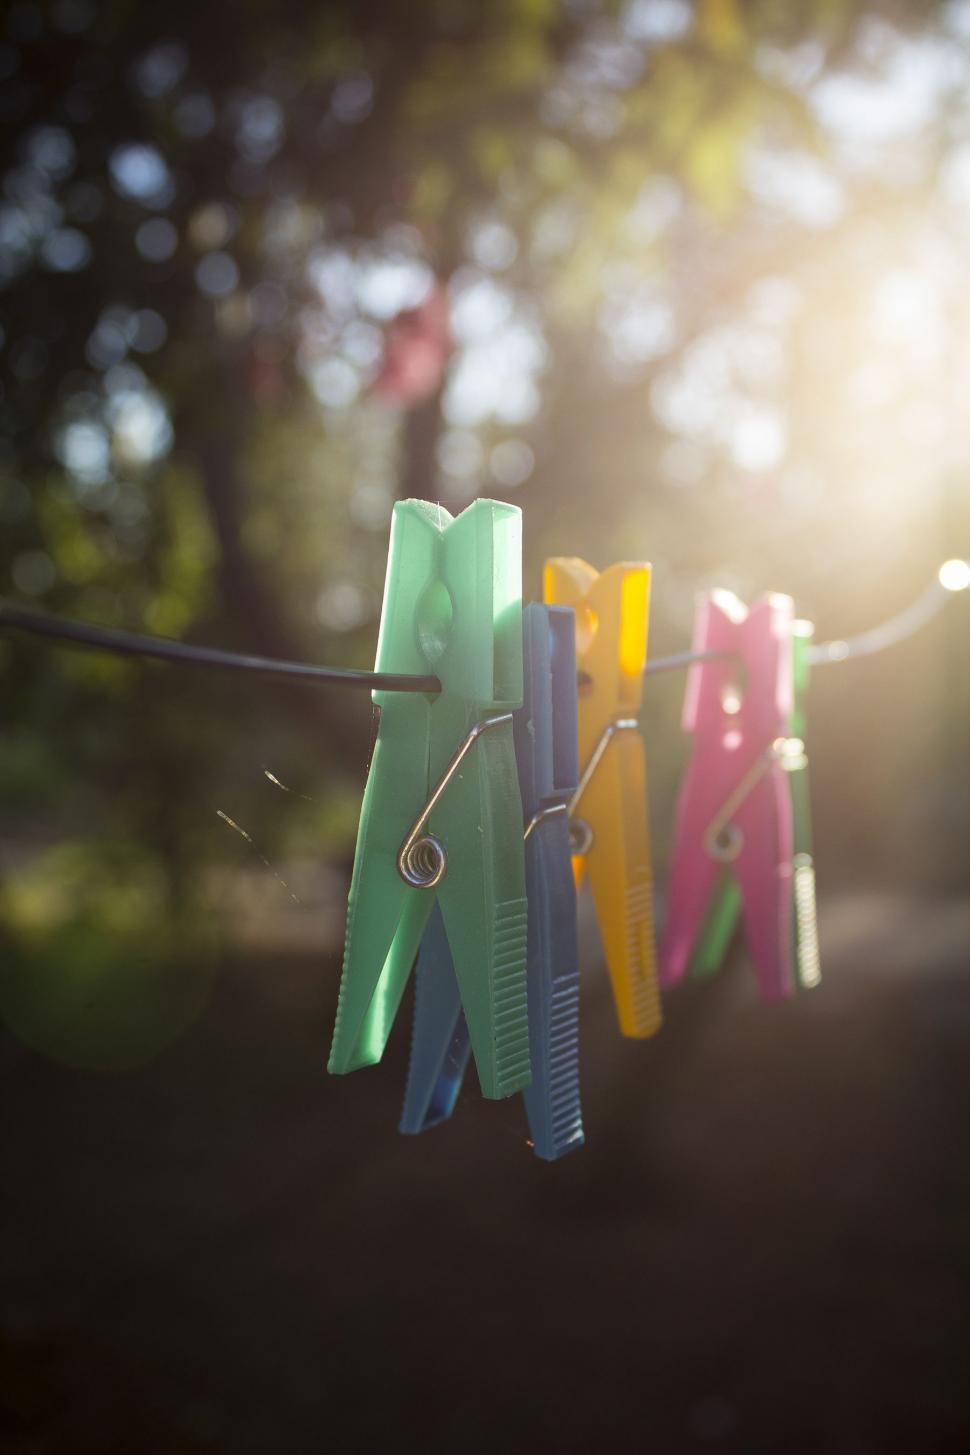 Free Image of Clothes-pegs  